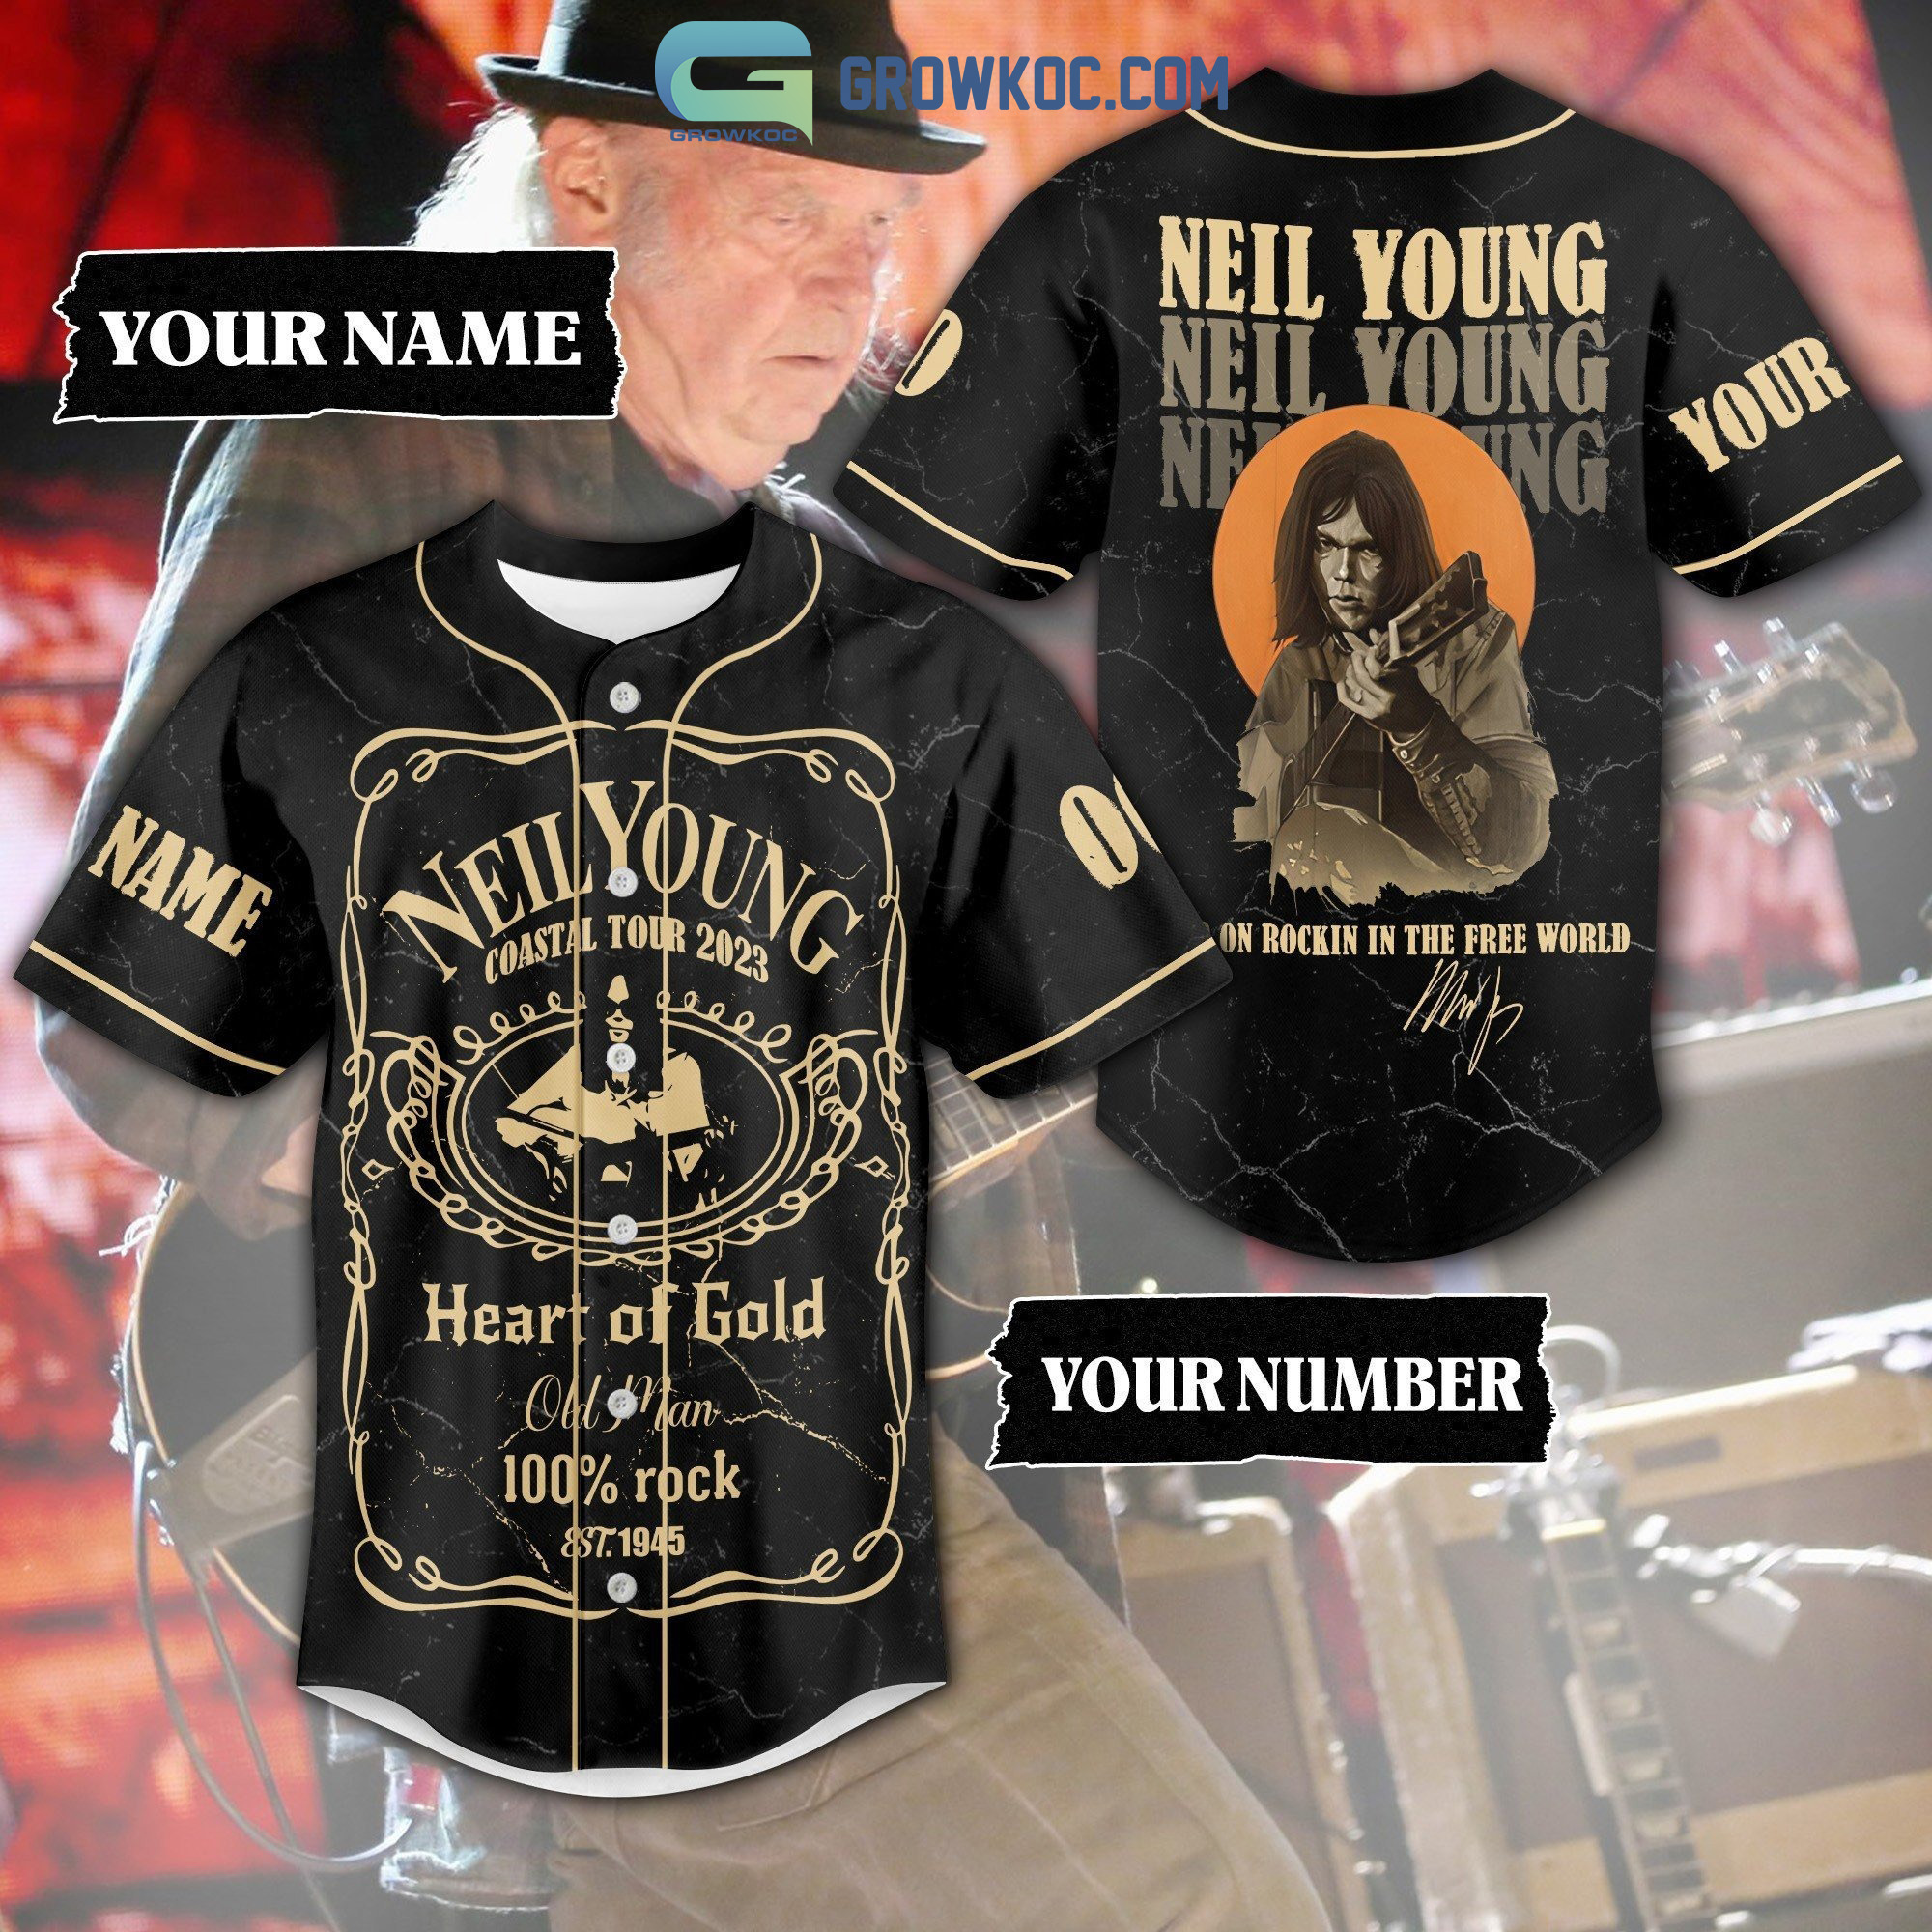 Neil Young Coastal Tour 2023 Keep On Rockin In The Free World Personalized Baseball Jersey